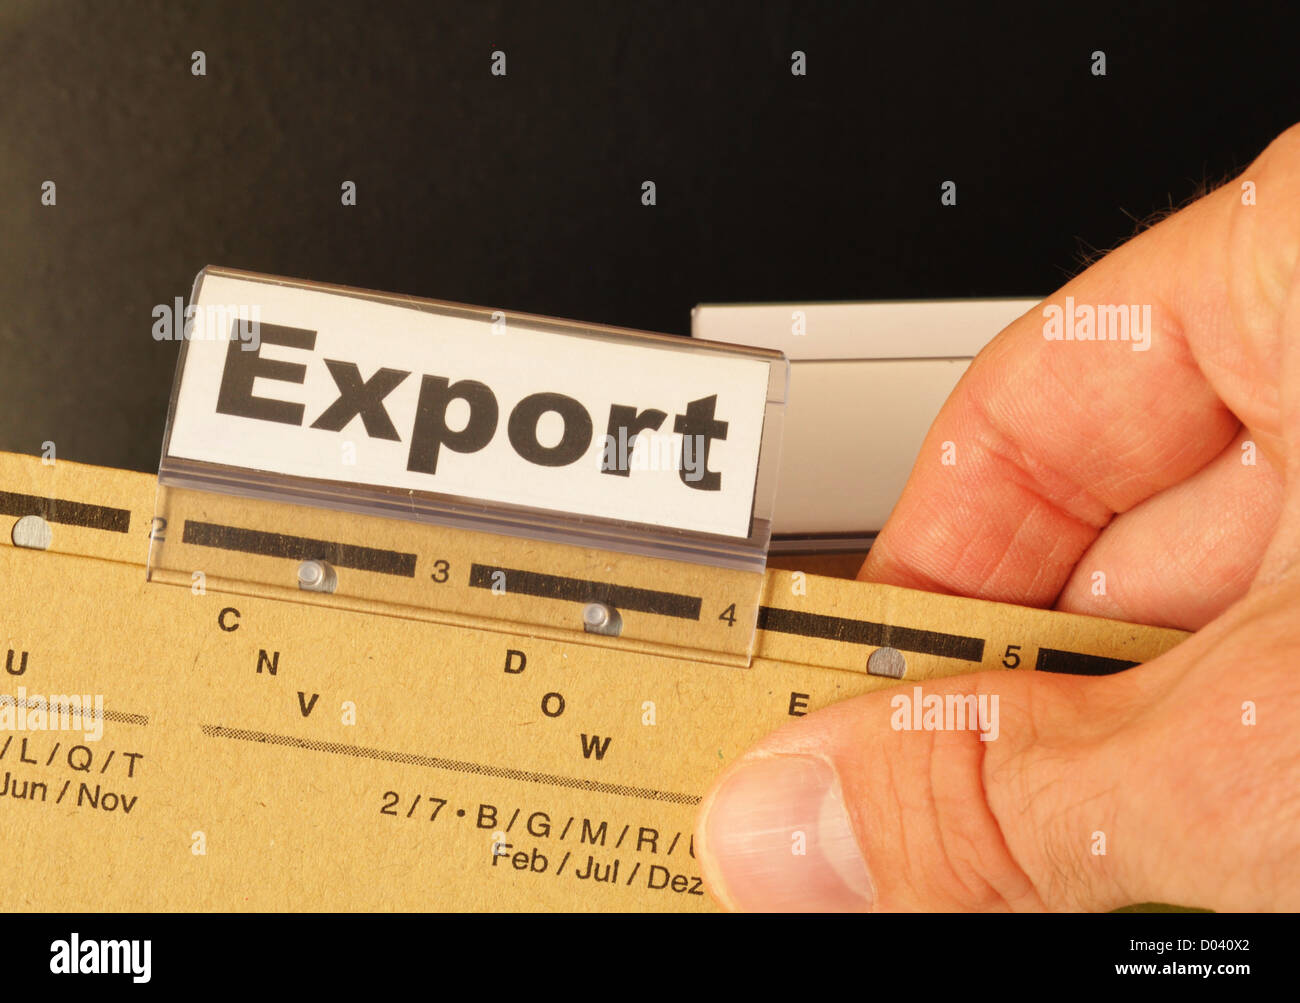 export word on business folder showing globalization trade or paperwork concept Stock Photo